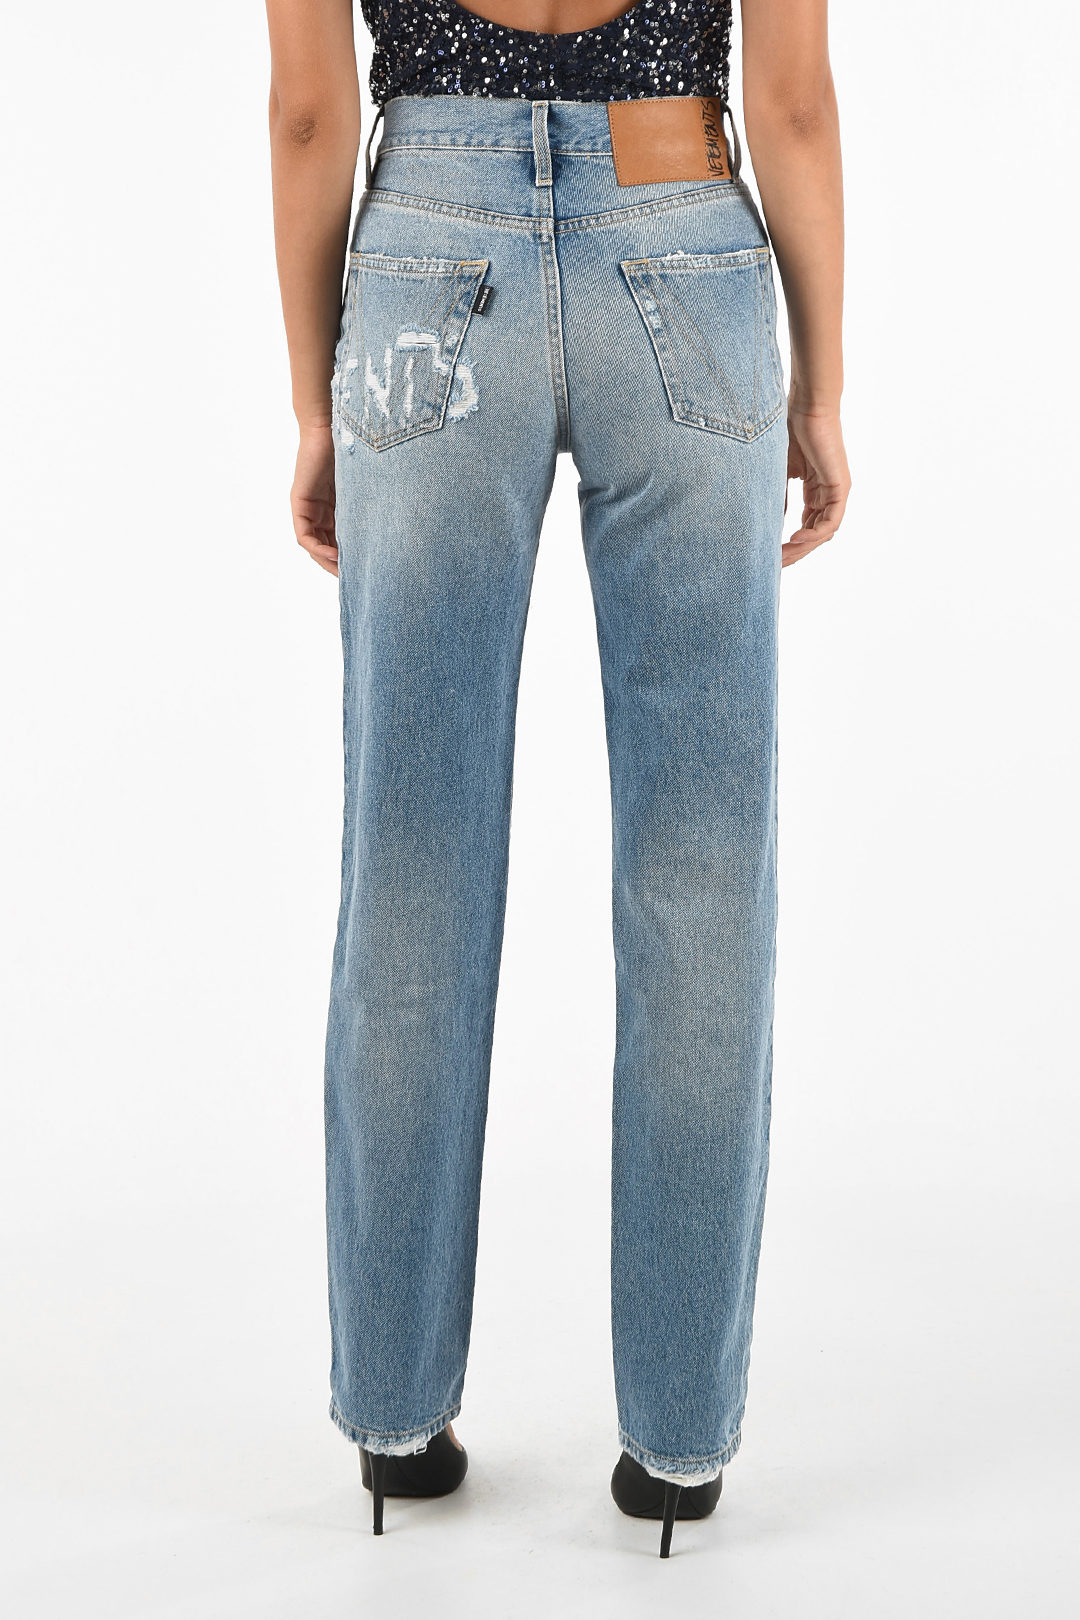 Vetements Distressed FUCKED UP Jeans women - Outlet